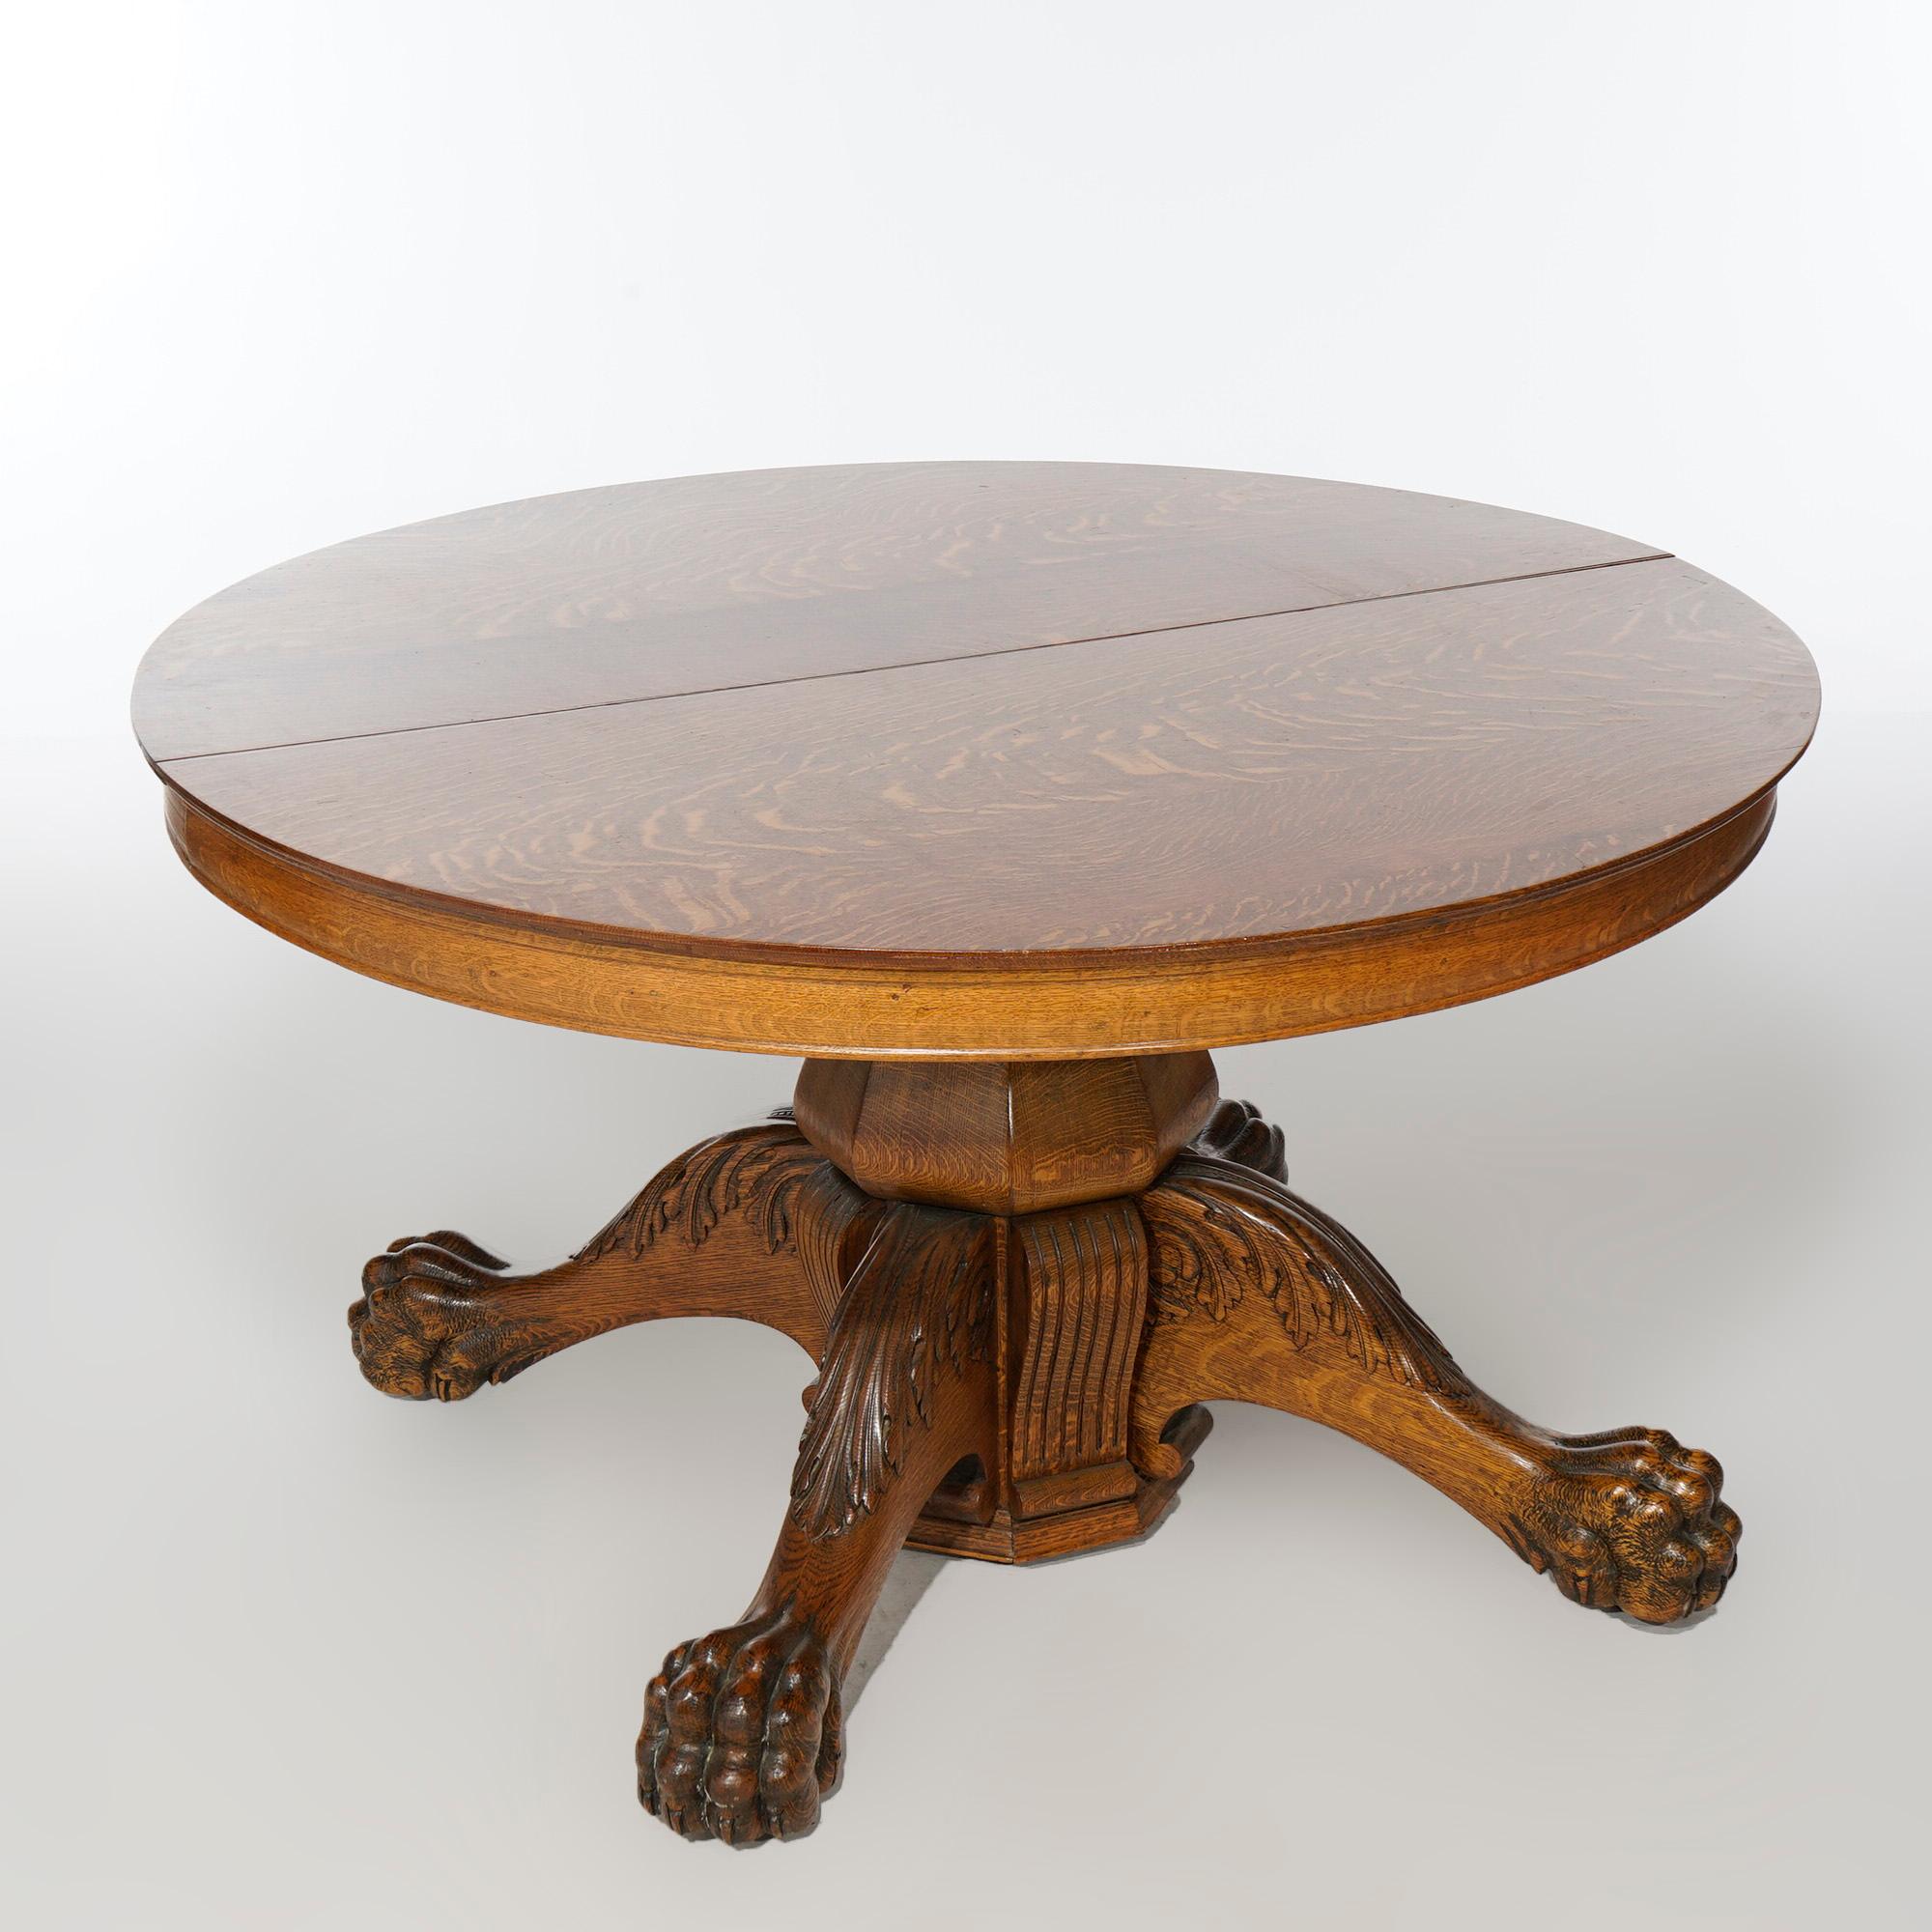 An antique extension dining table offers oak construction with round top over urn-form pedestal raised on cabriole legs with acanthus knees and carved paw feet, accepts three leaves, c1910

Measures- Without leaves 29.25''H x 54.5''W x